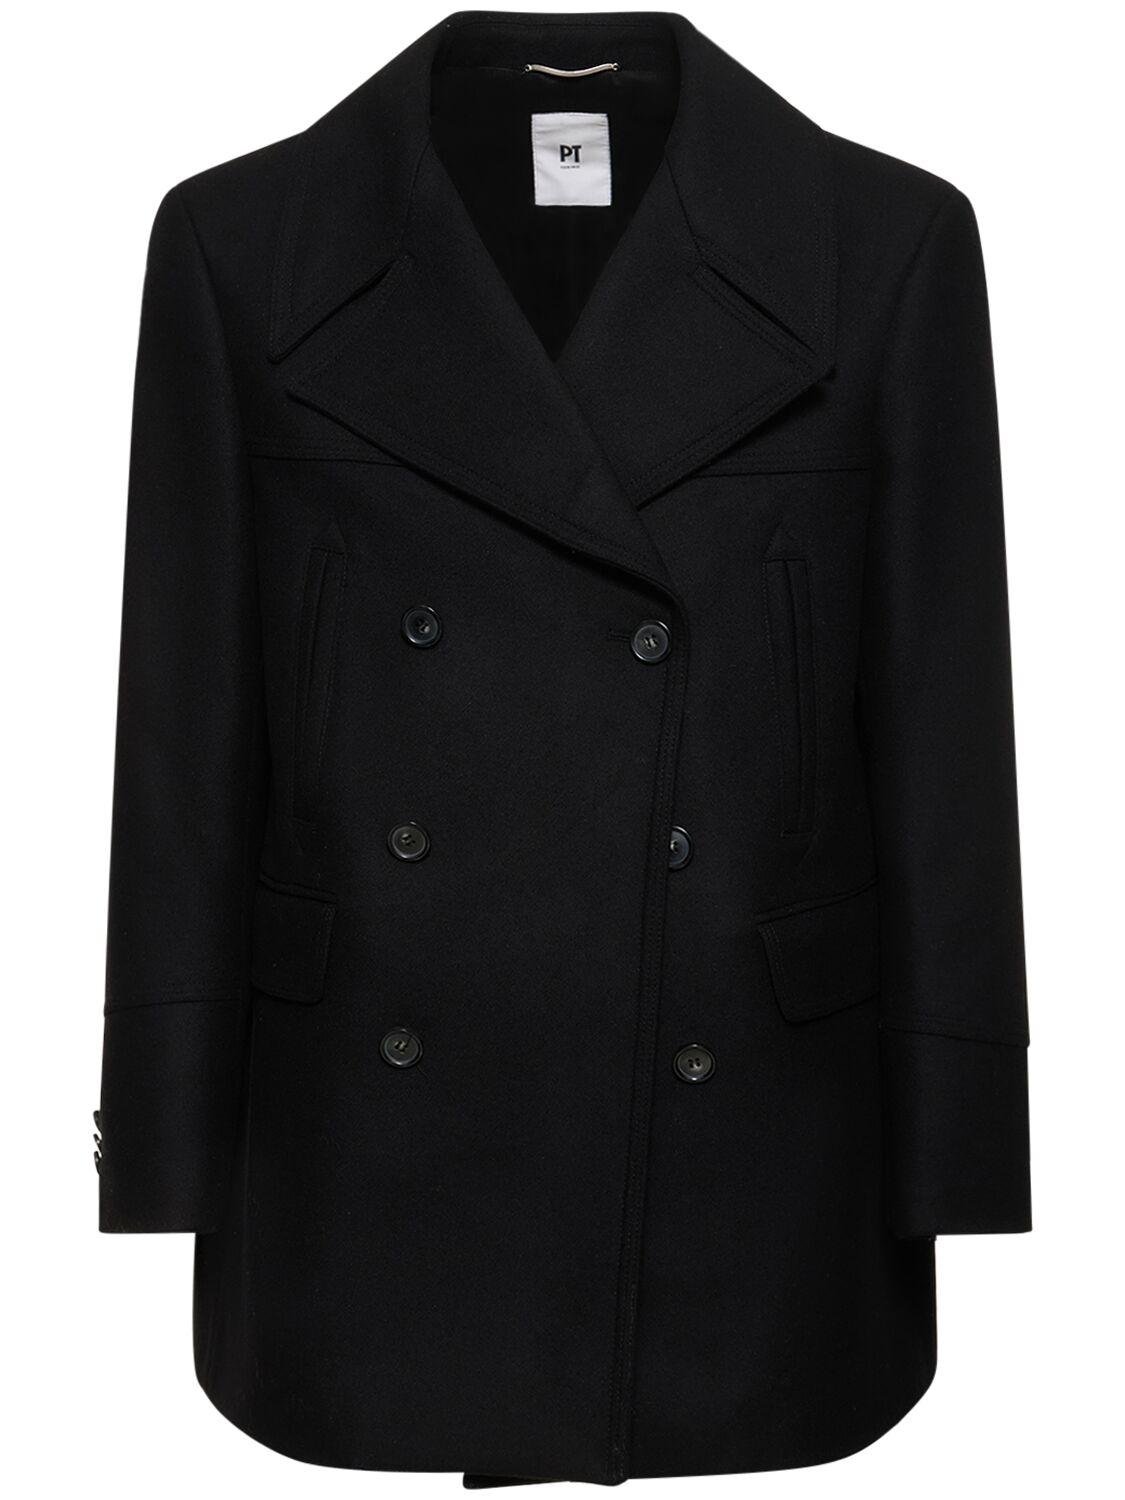 Double Breasted Wool Blend Peacoat by PT TORINO